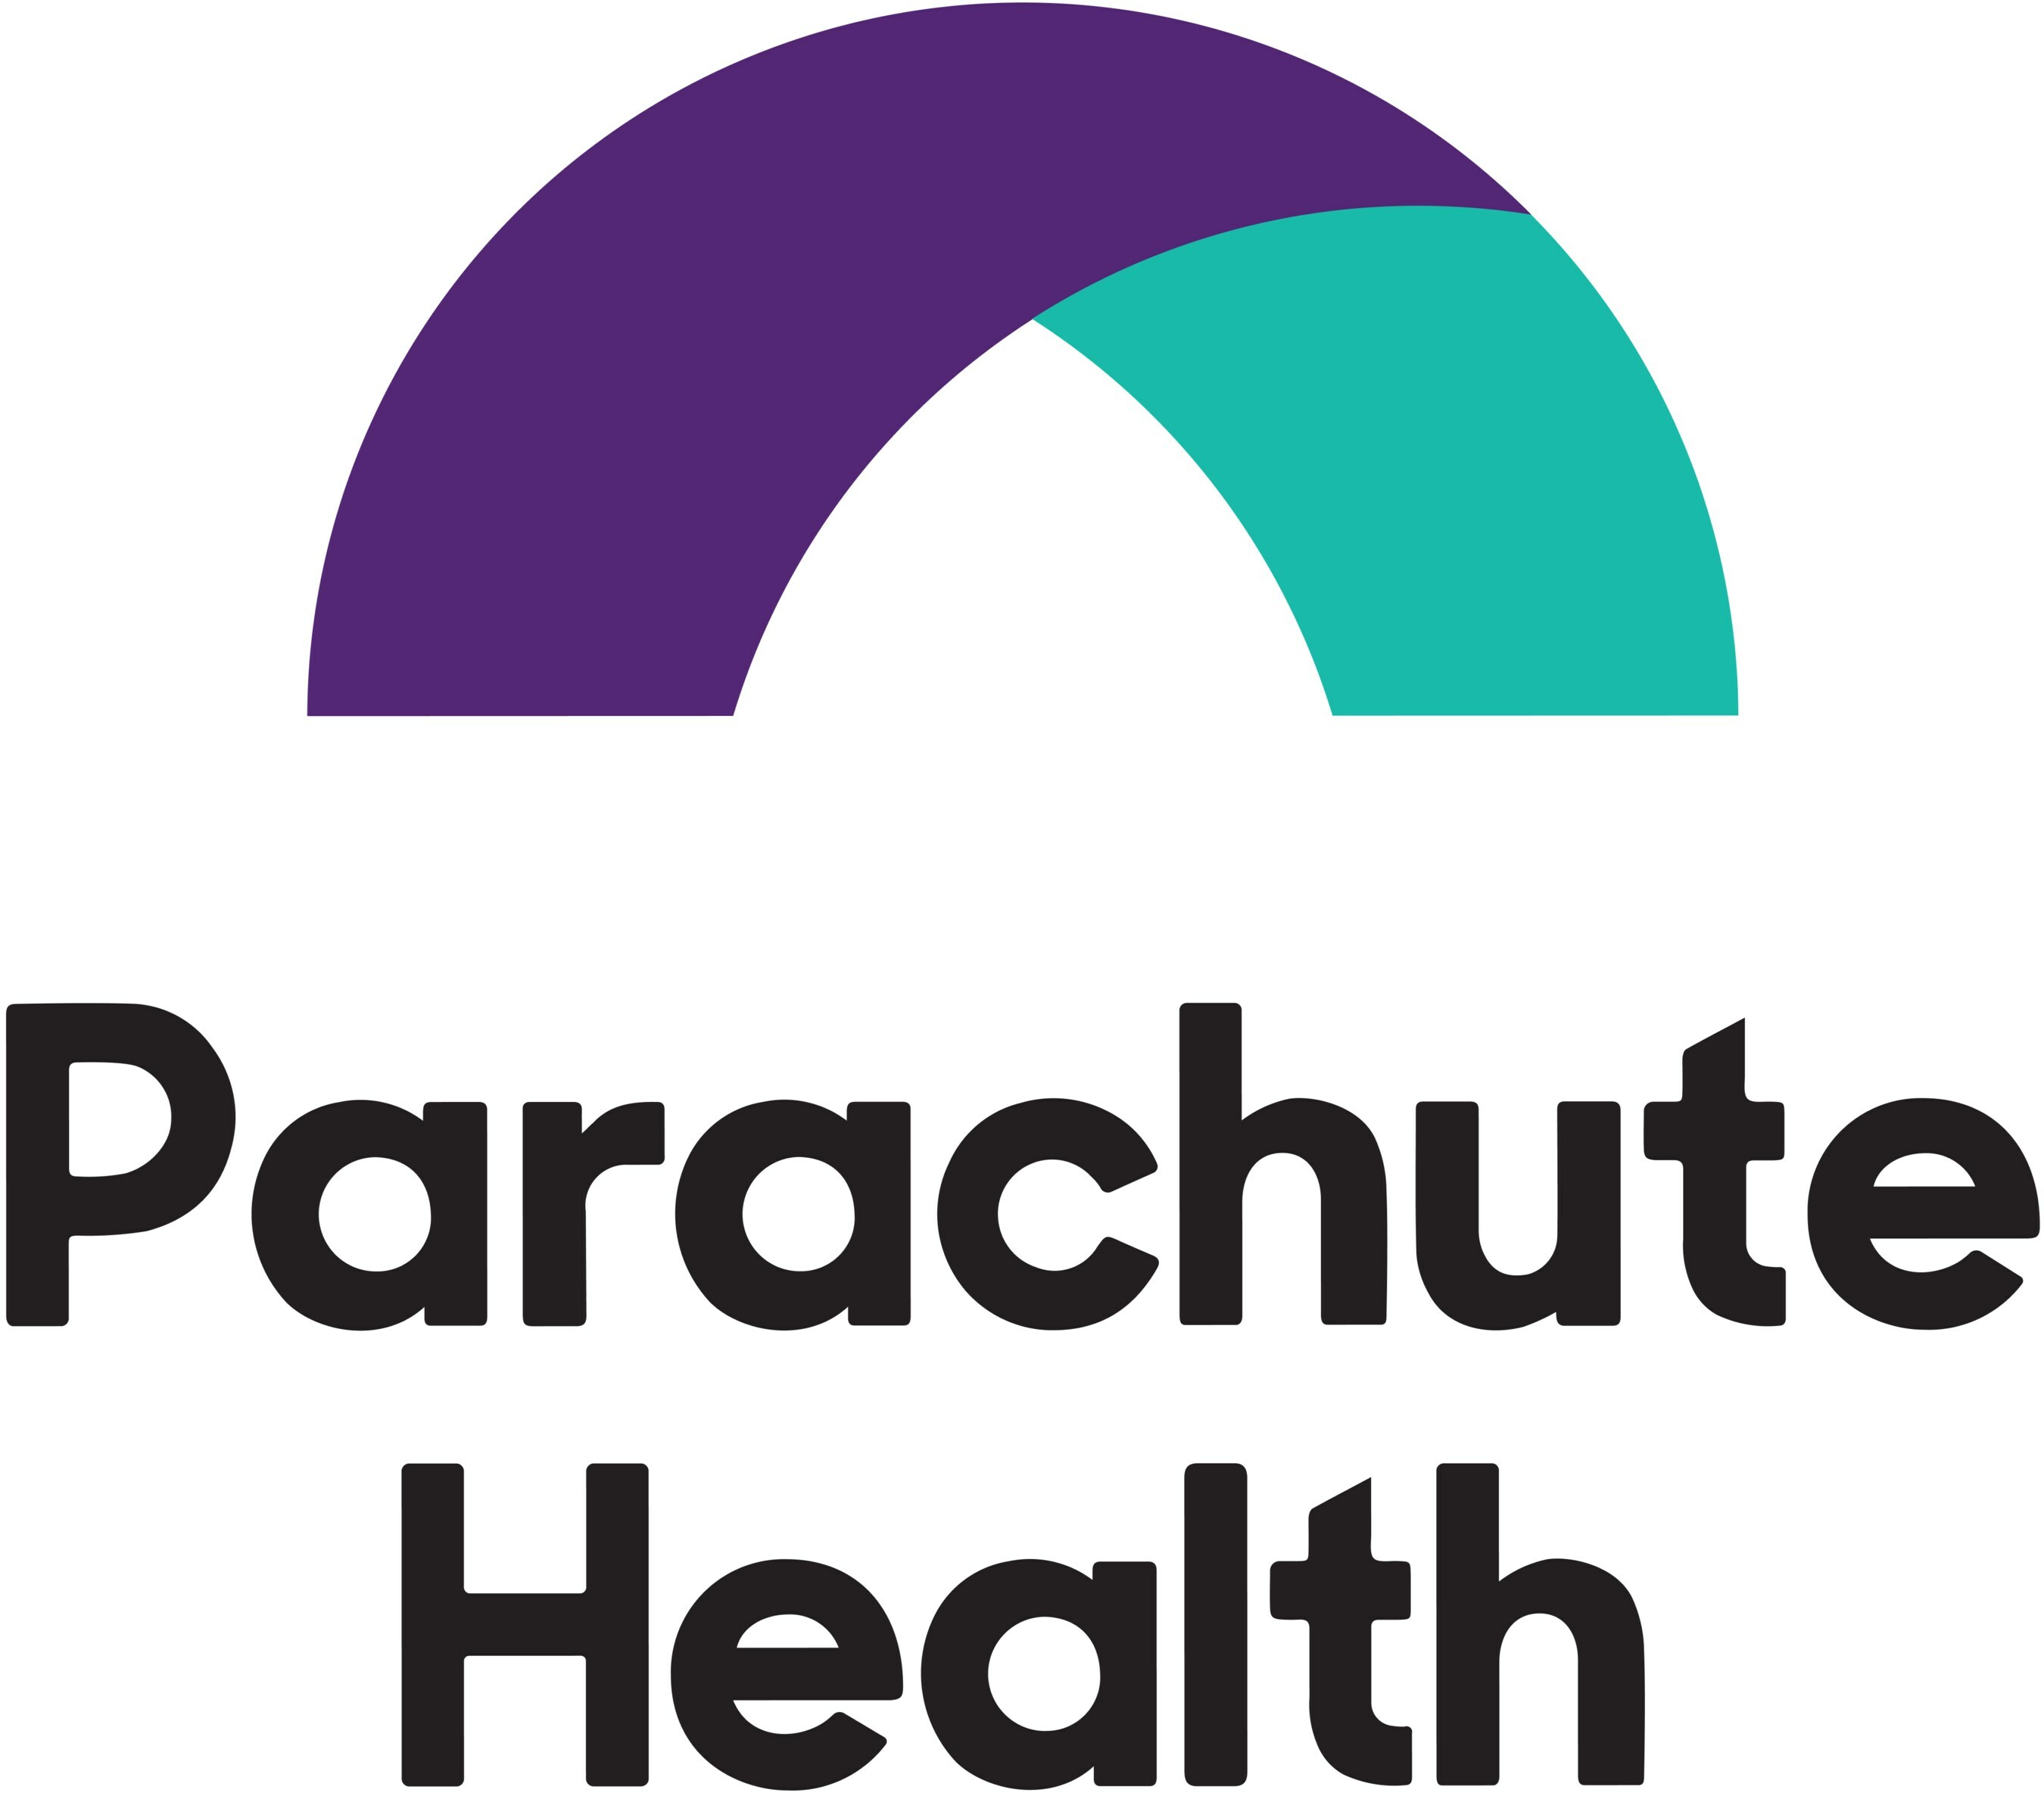 Parachute Health empowers healthcare providers with delightfully simple DME and supplies ordering, and powers suppliers with the industry leading DME / HME ePrescribing platform.